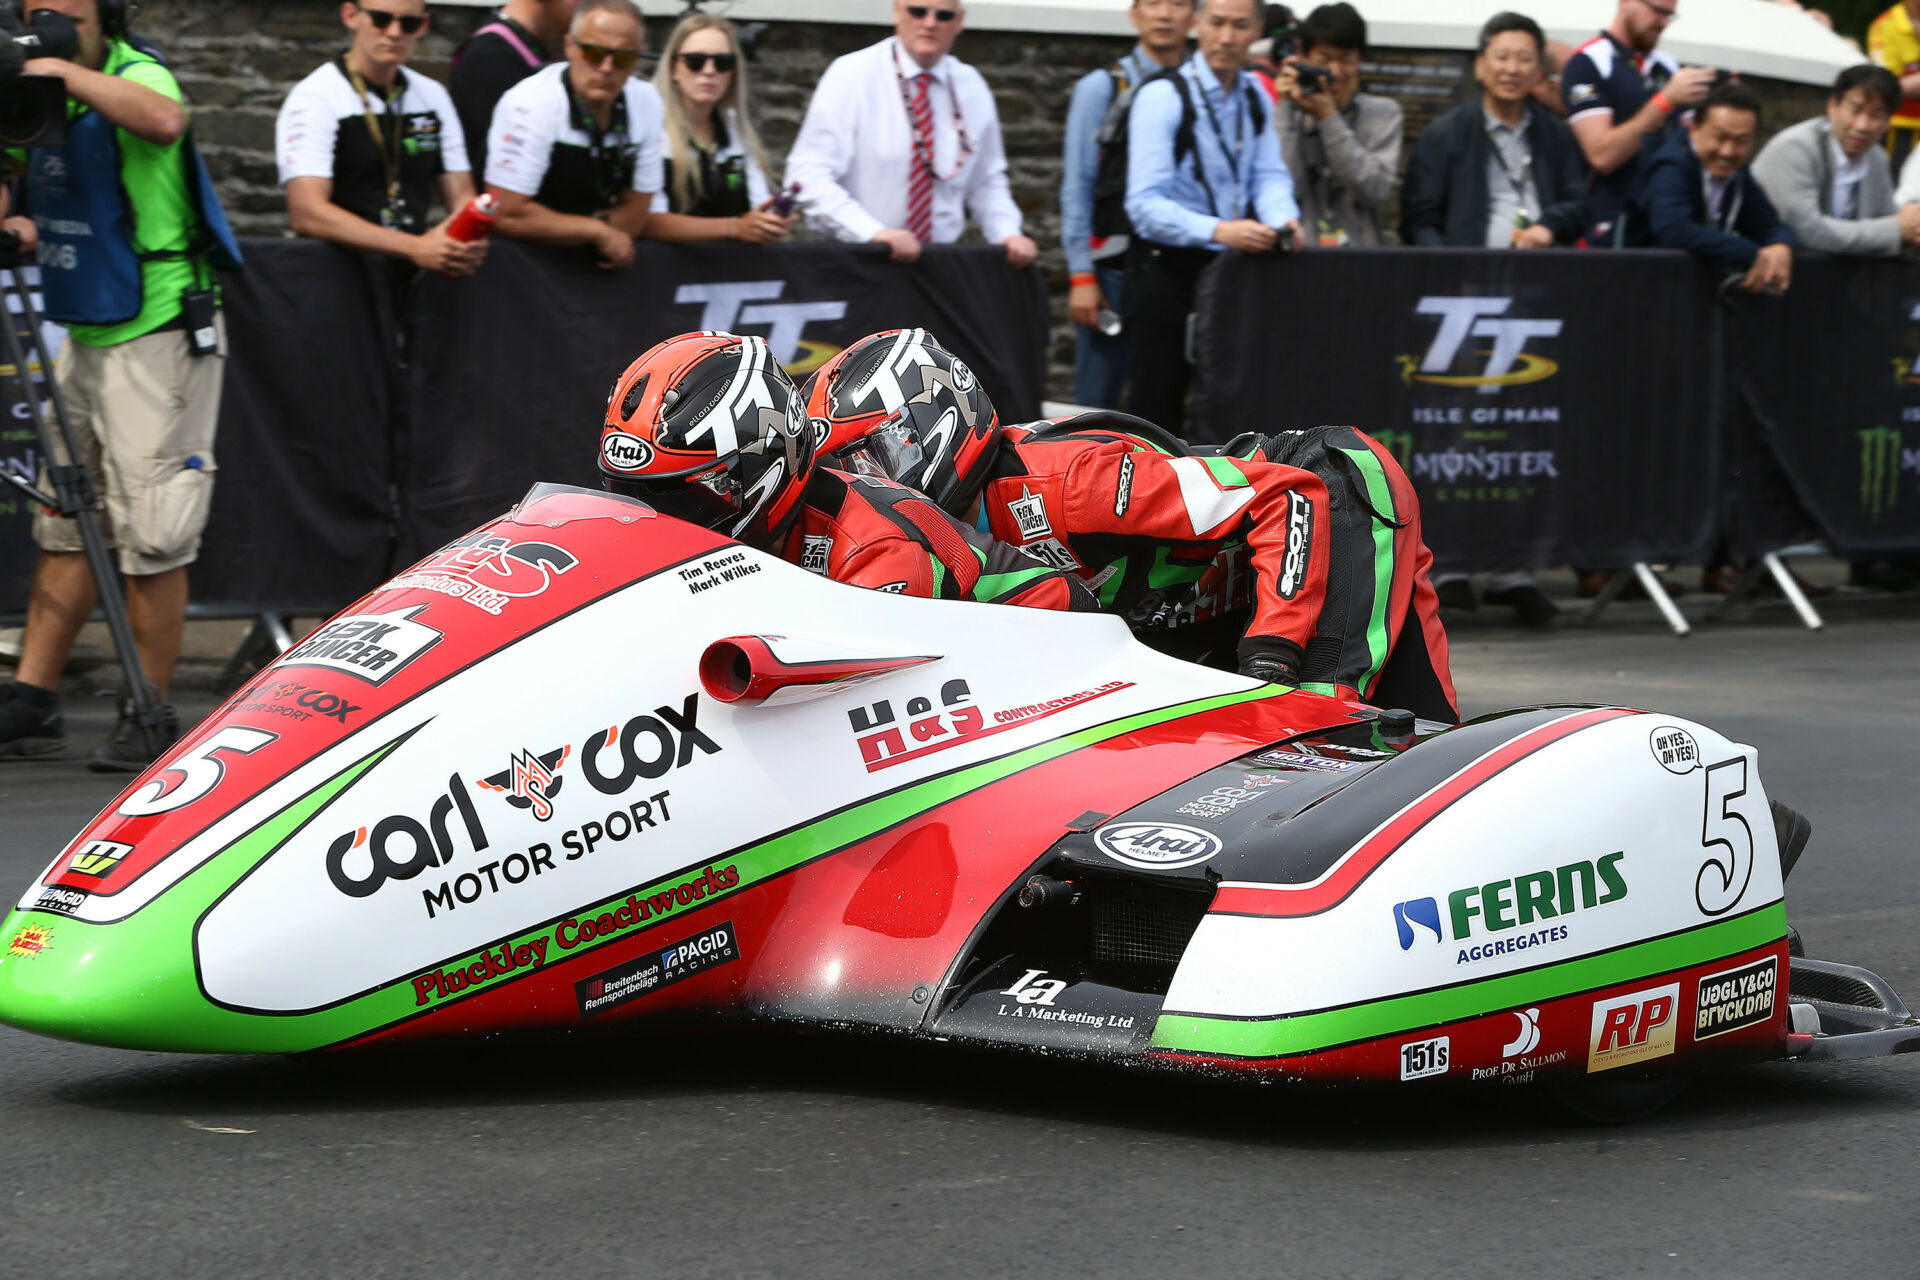 The Carl Cox Motorsport New Zealand Sidecar Team in action at the Isle of Man TT. Photo courtesy Carl Cox Motorsport and AHRMA.